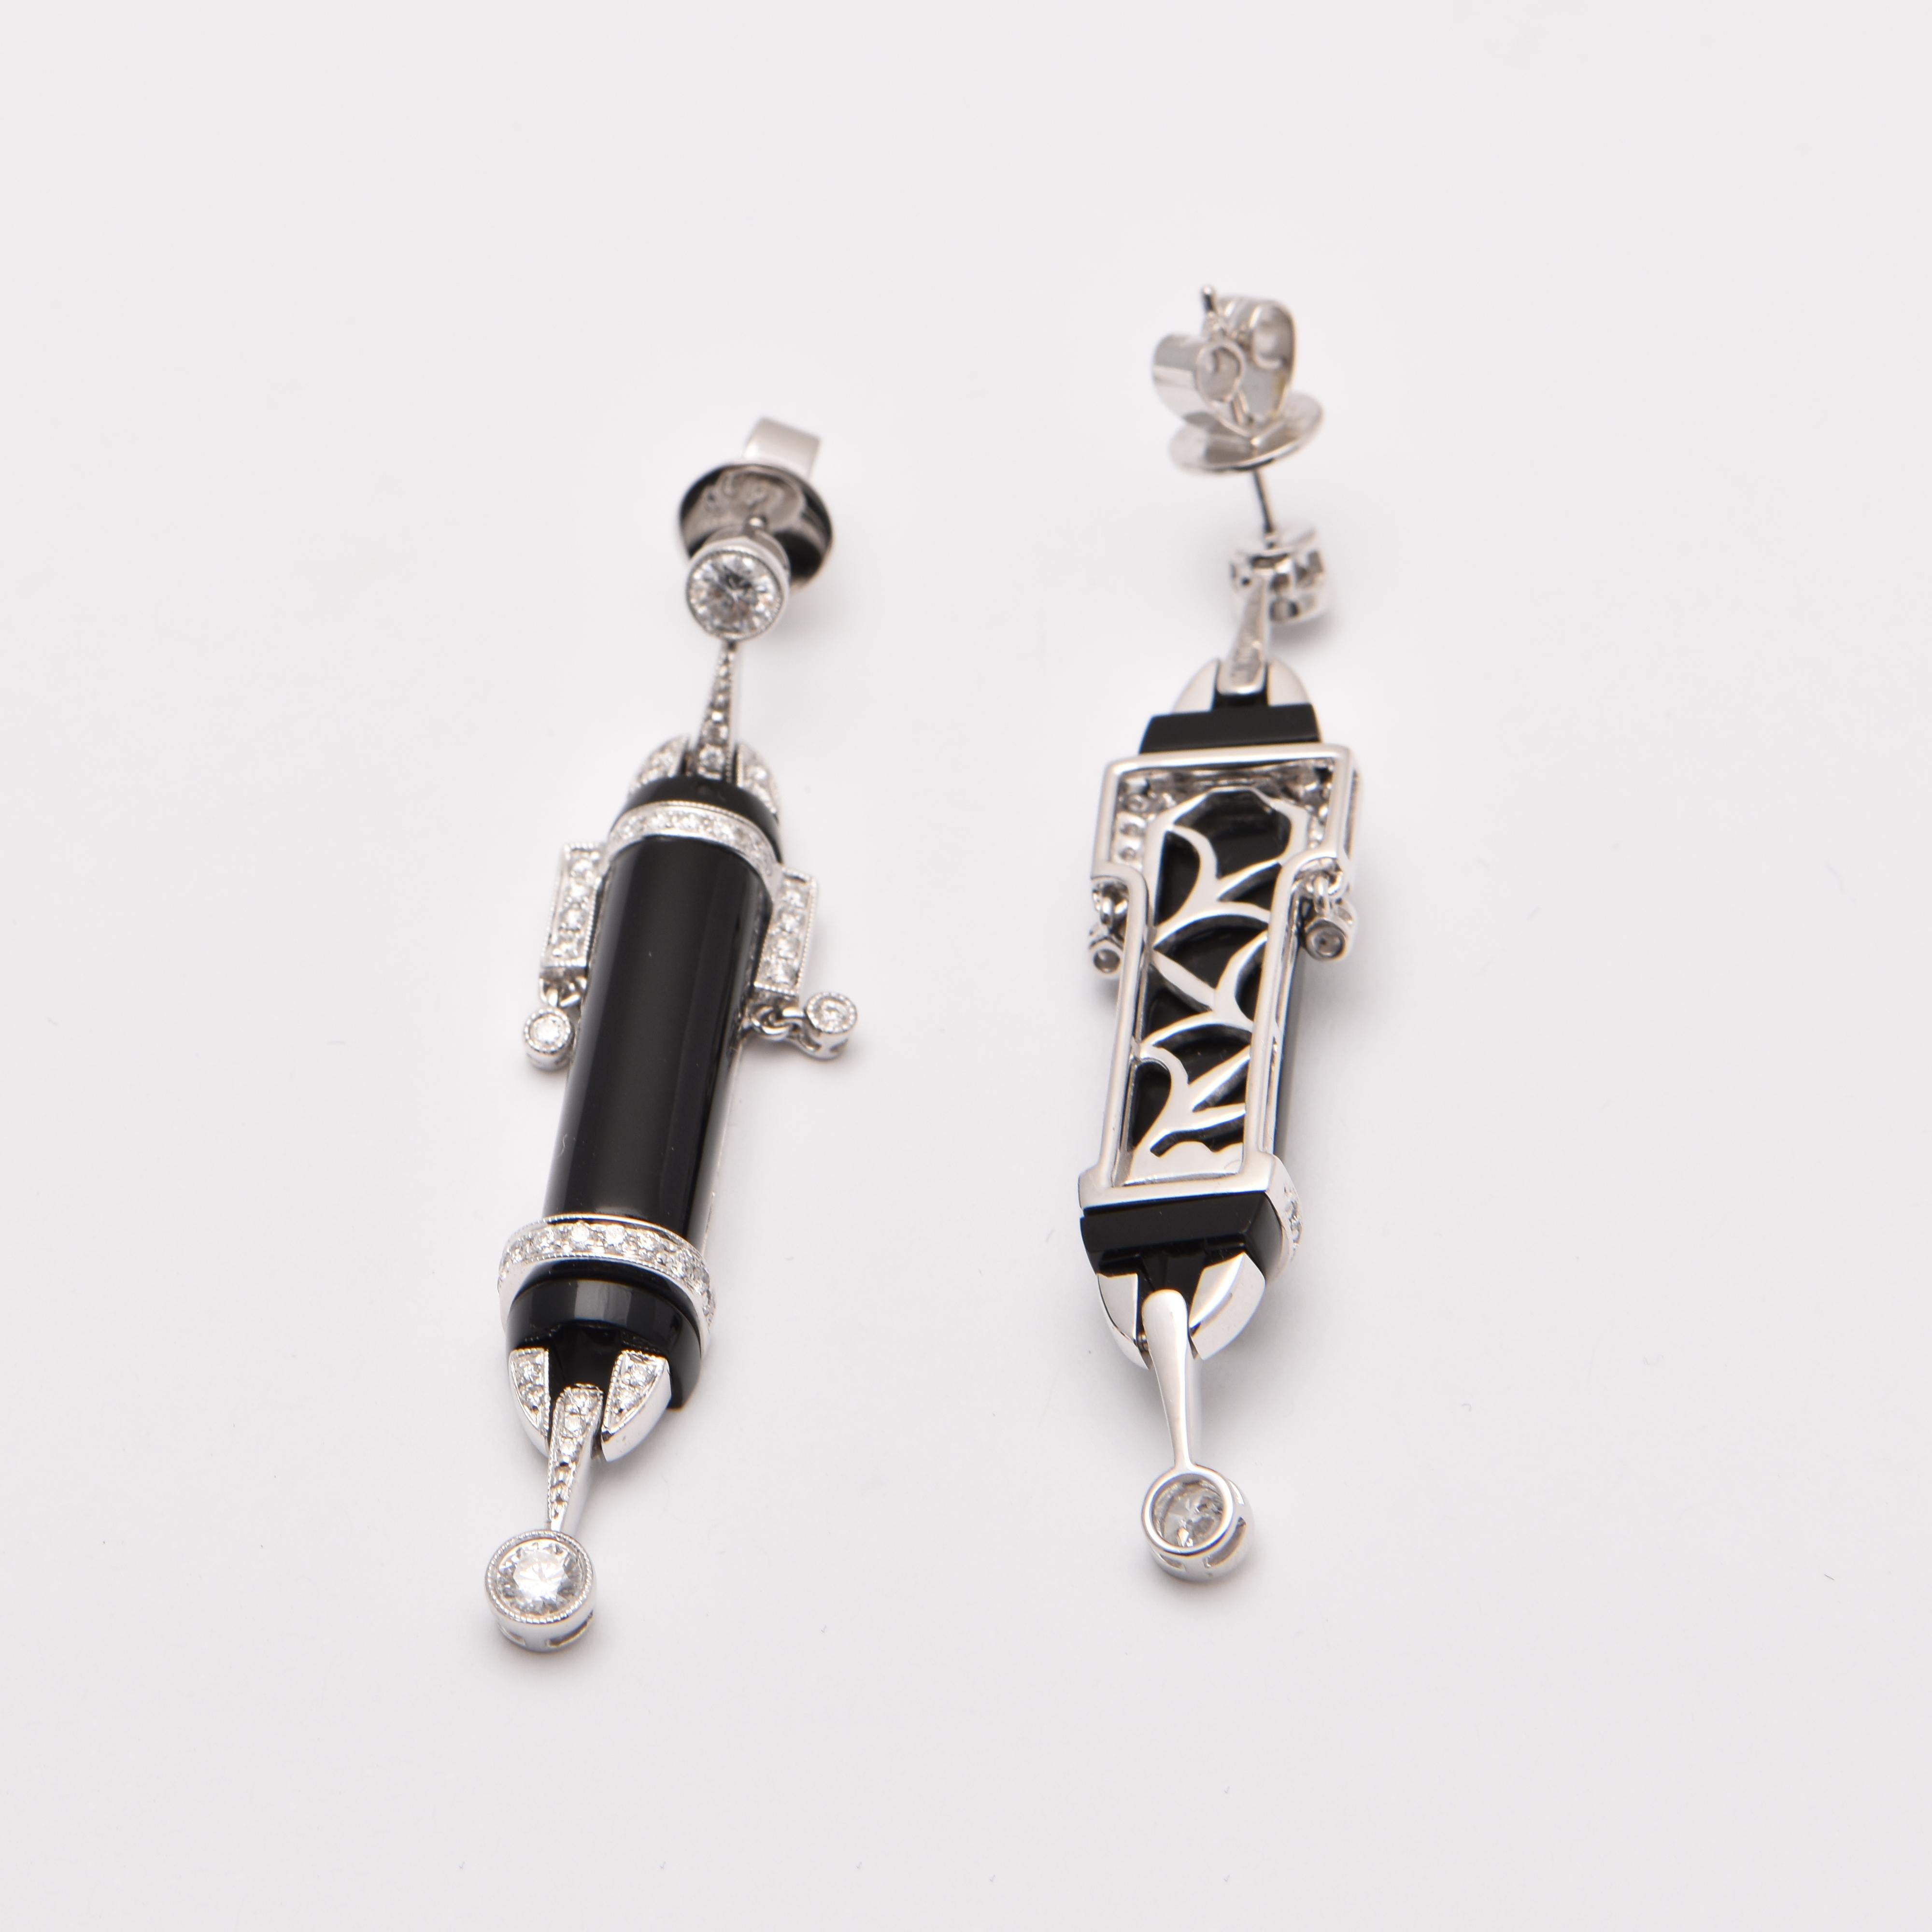 Art Deco Style 1 Carat Diamond and Onyx Earrings in 18 Carat White Gold For Sale 2